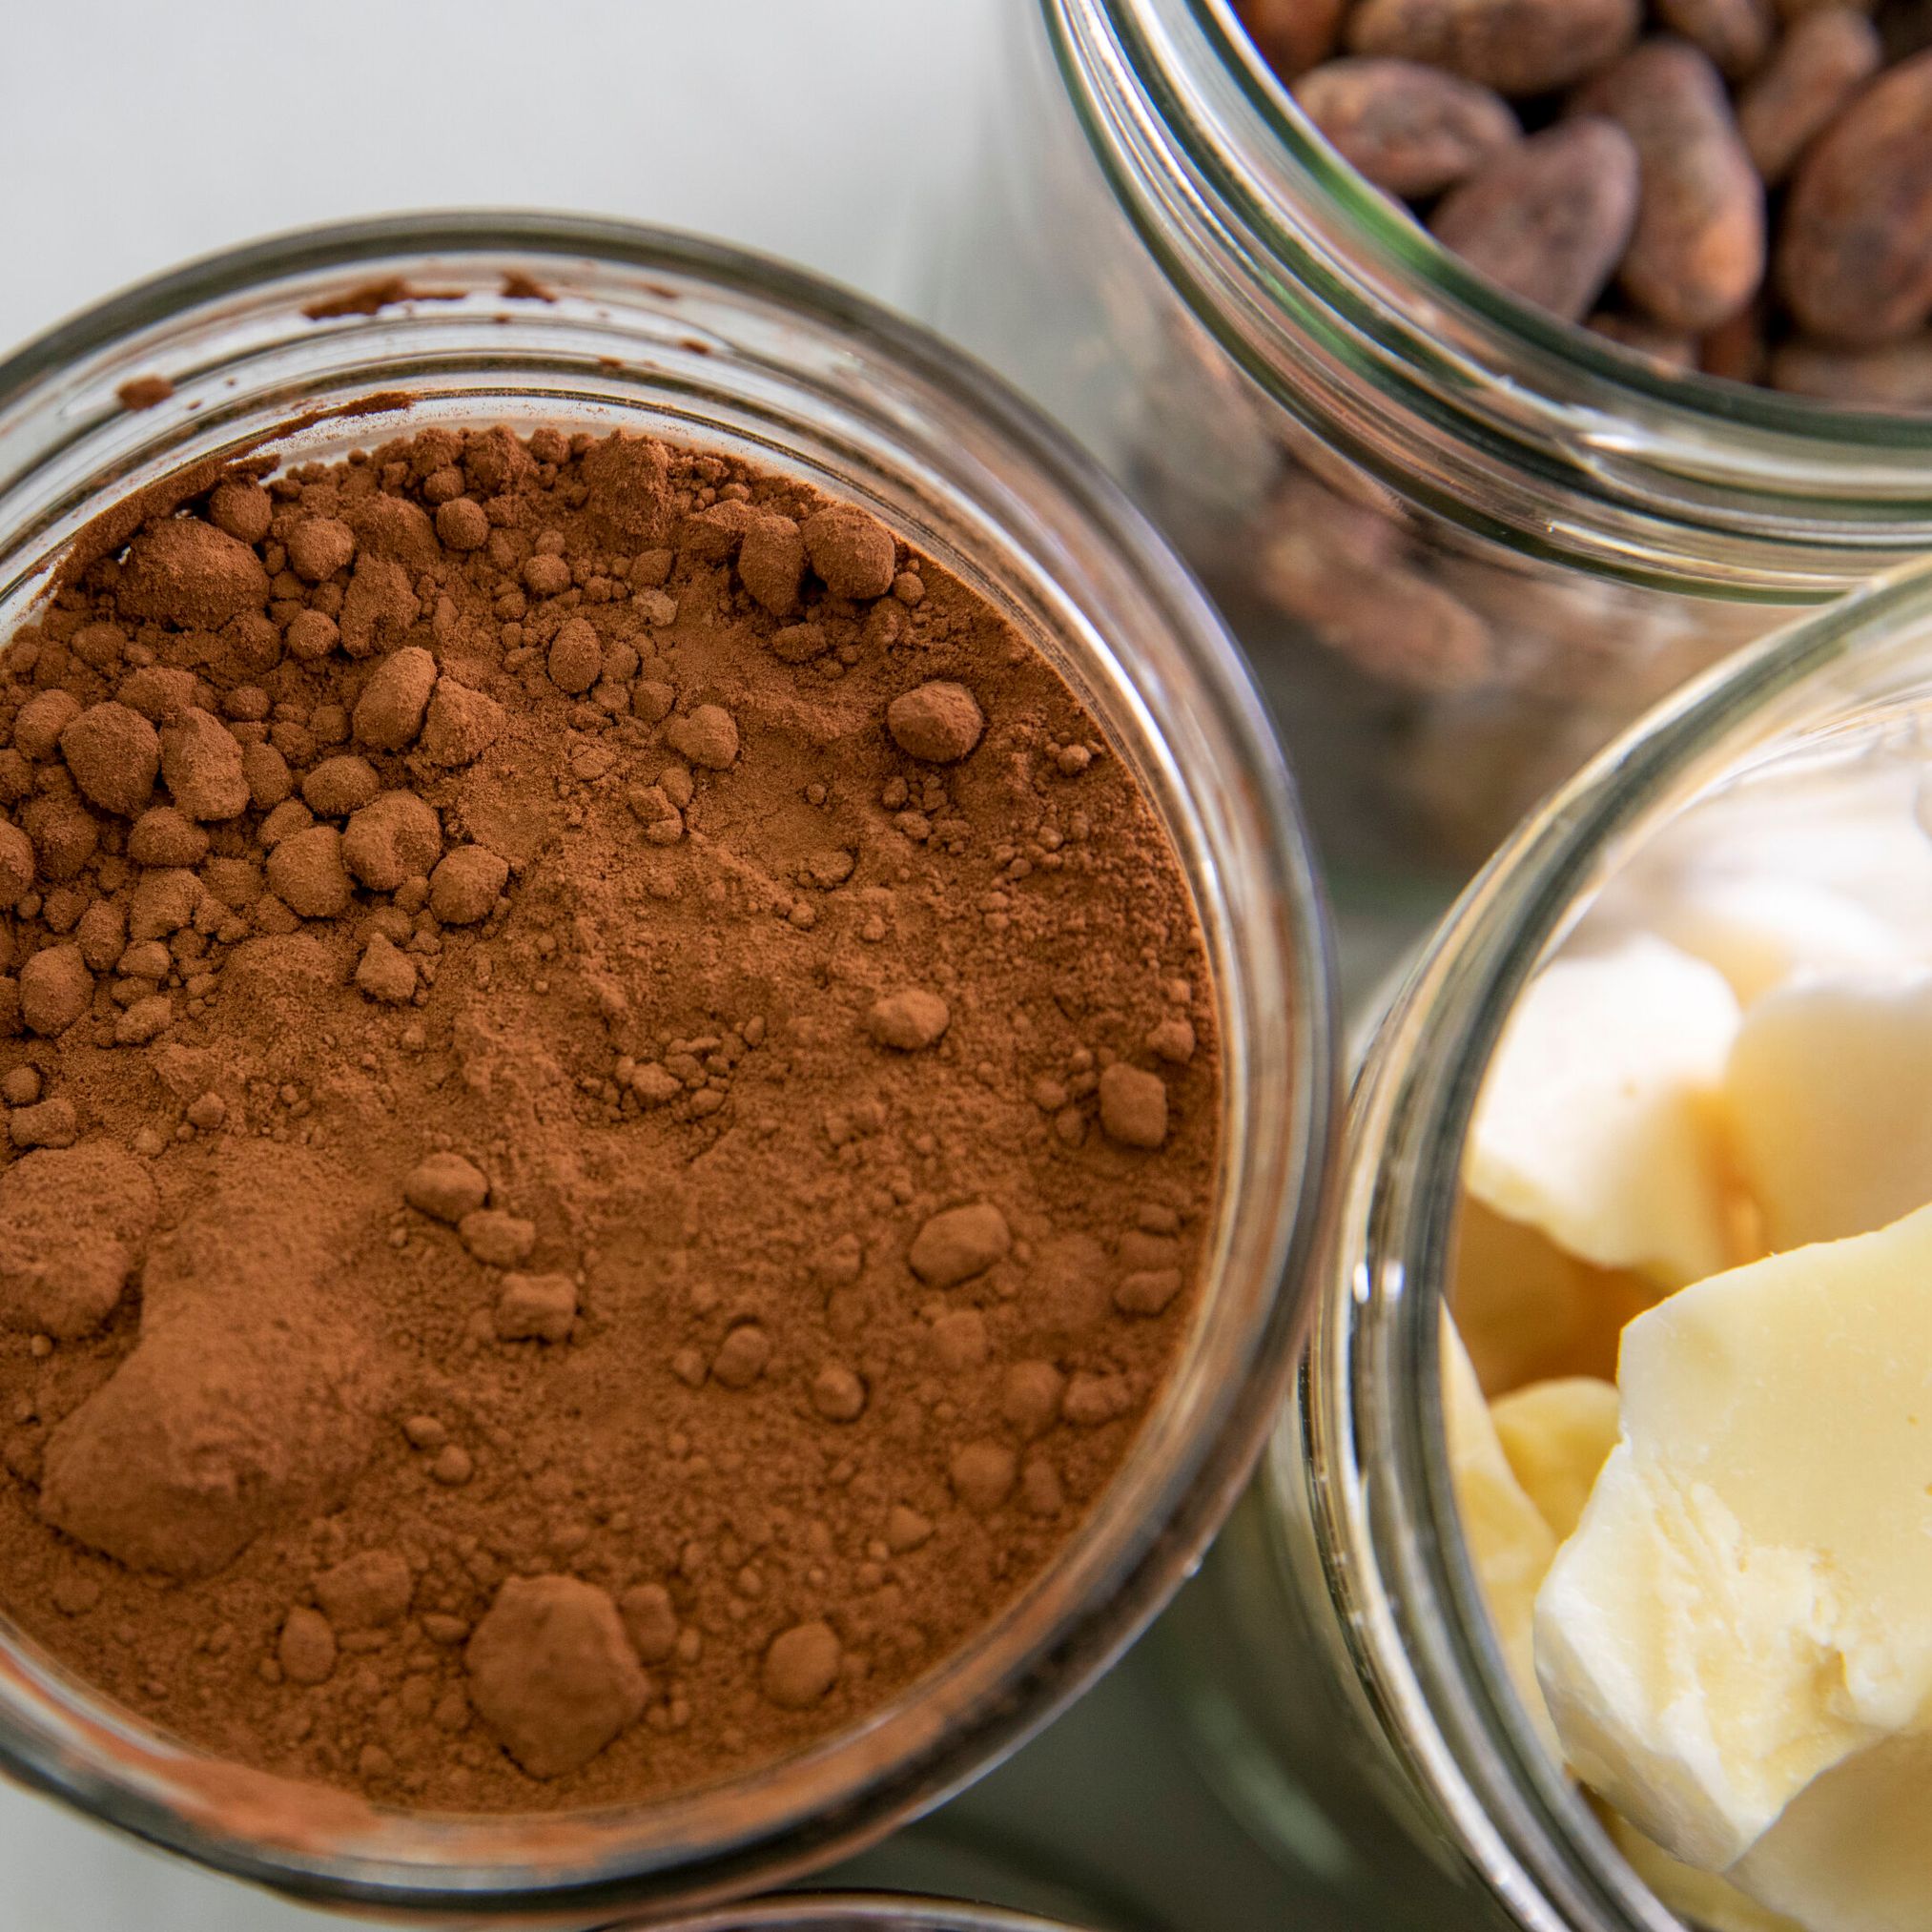 In its plant, PRONATEC is the first company in Switzerland to produce all three organic cocoa semi-finished products, namely cocoa mass, butter and powder.